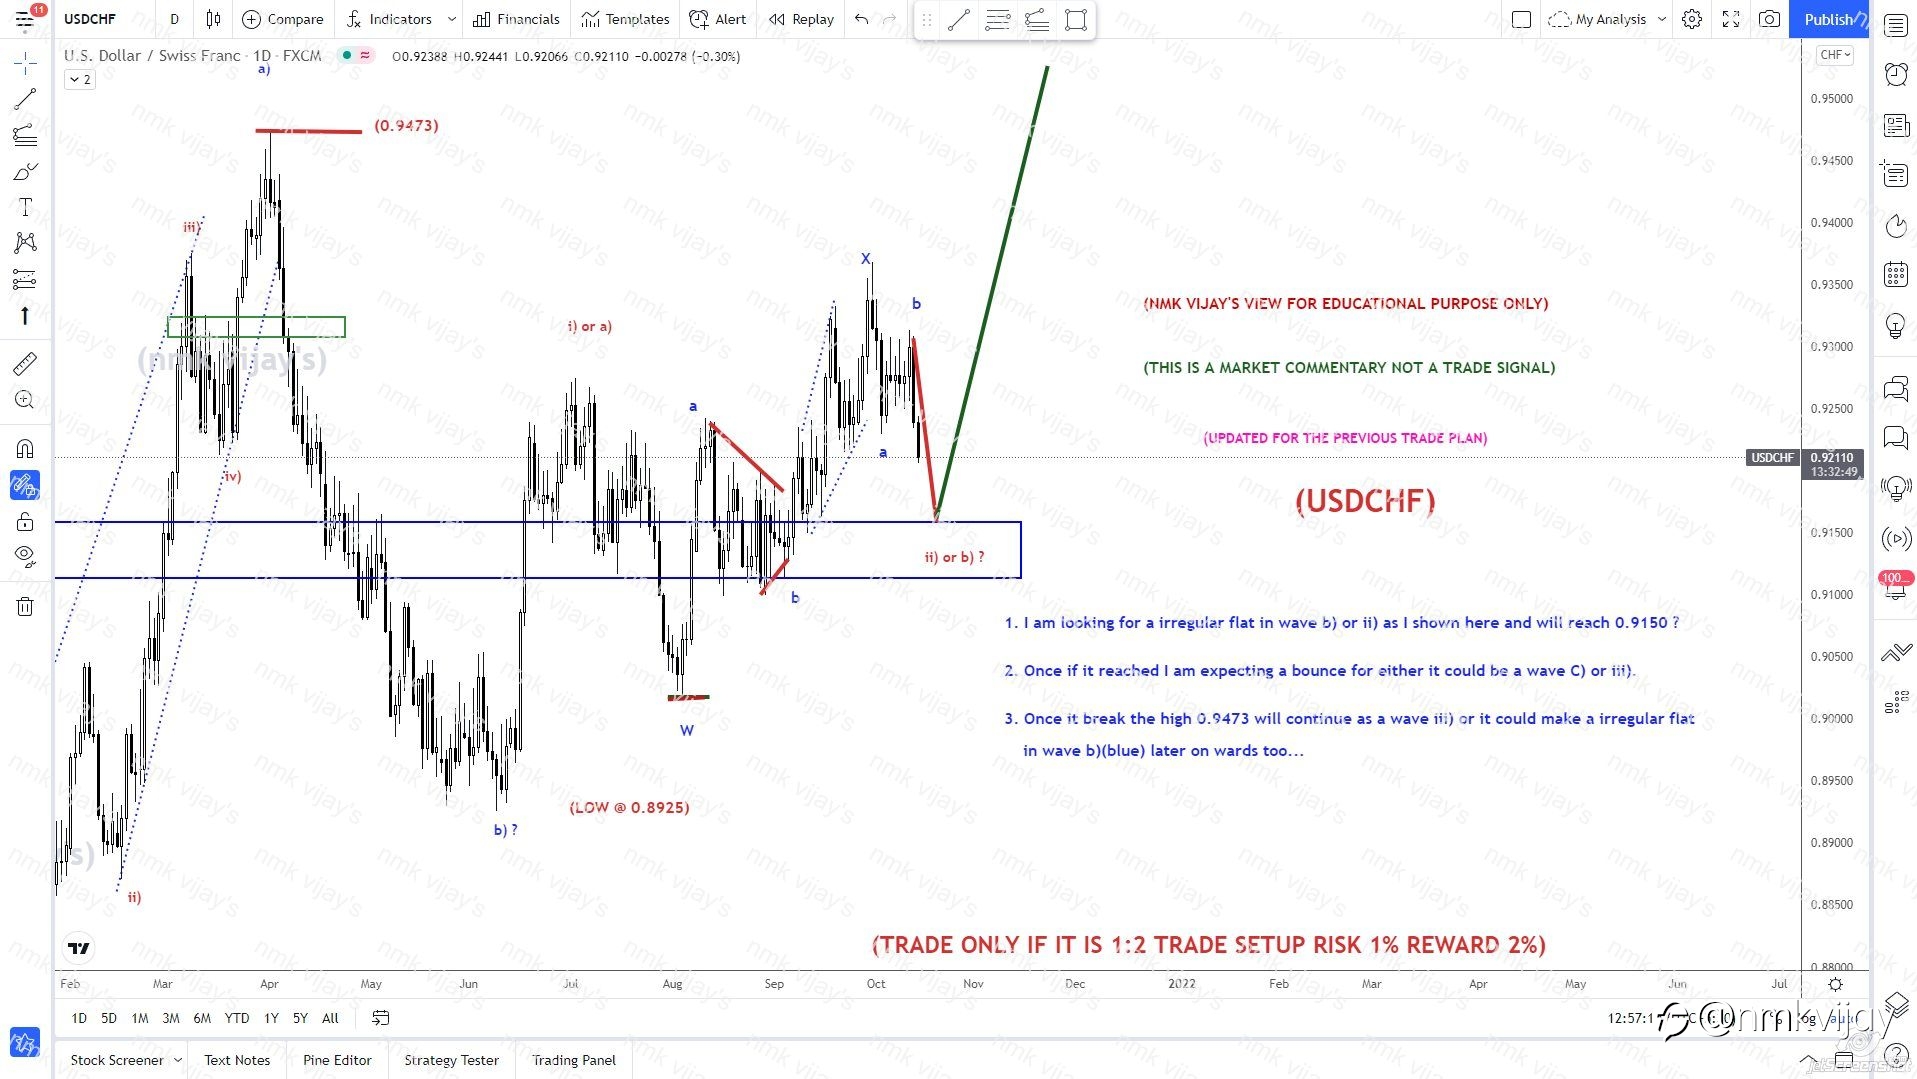 USDCHF-Looking for a wave ii) or b) as a irregular flat.